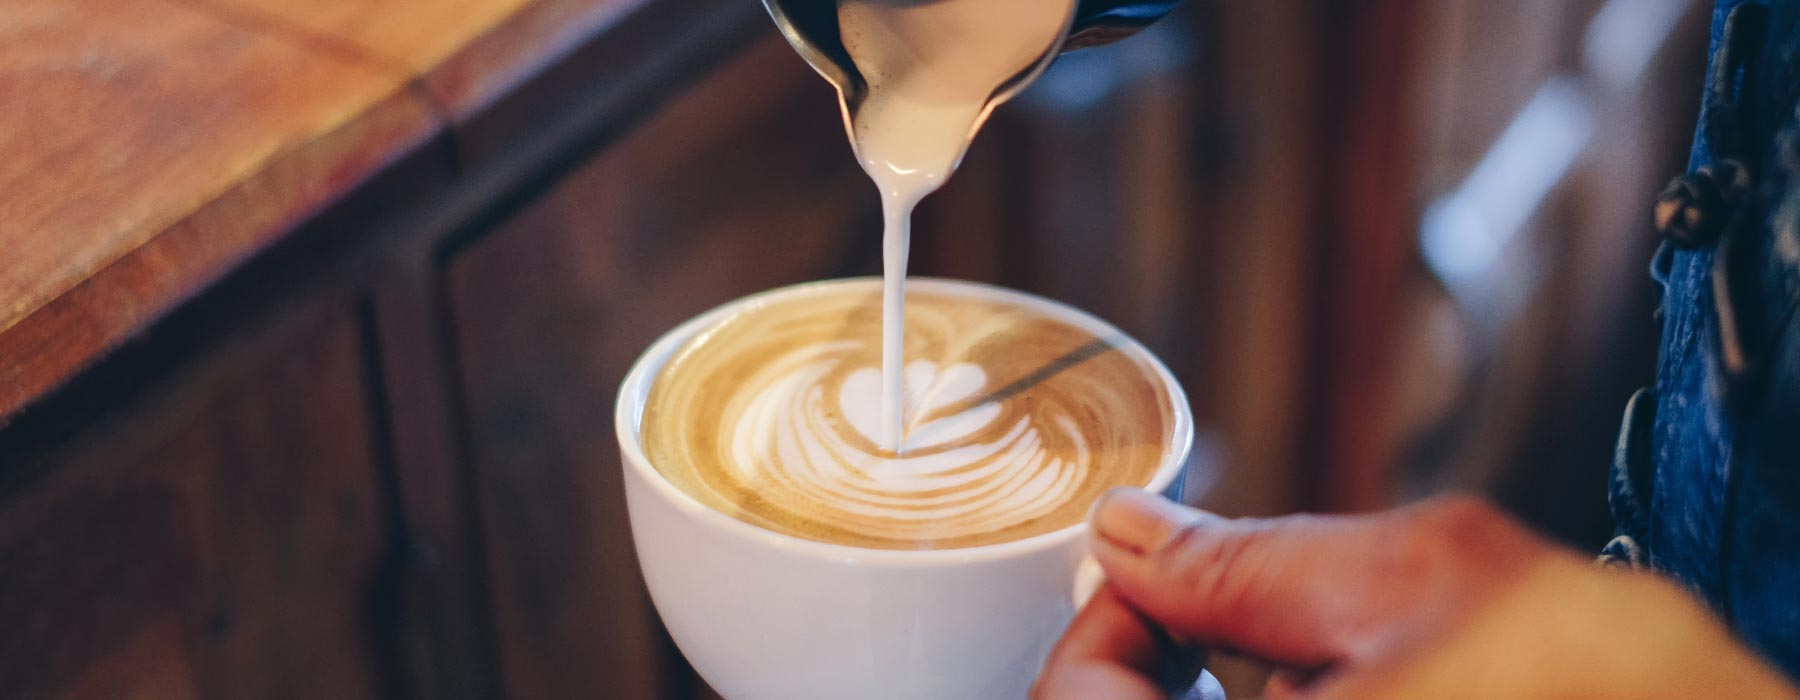 A Beginner’s Guide on How to Become a Home Barista - have patience, blog by EspressoWorks